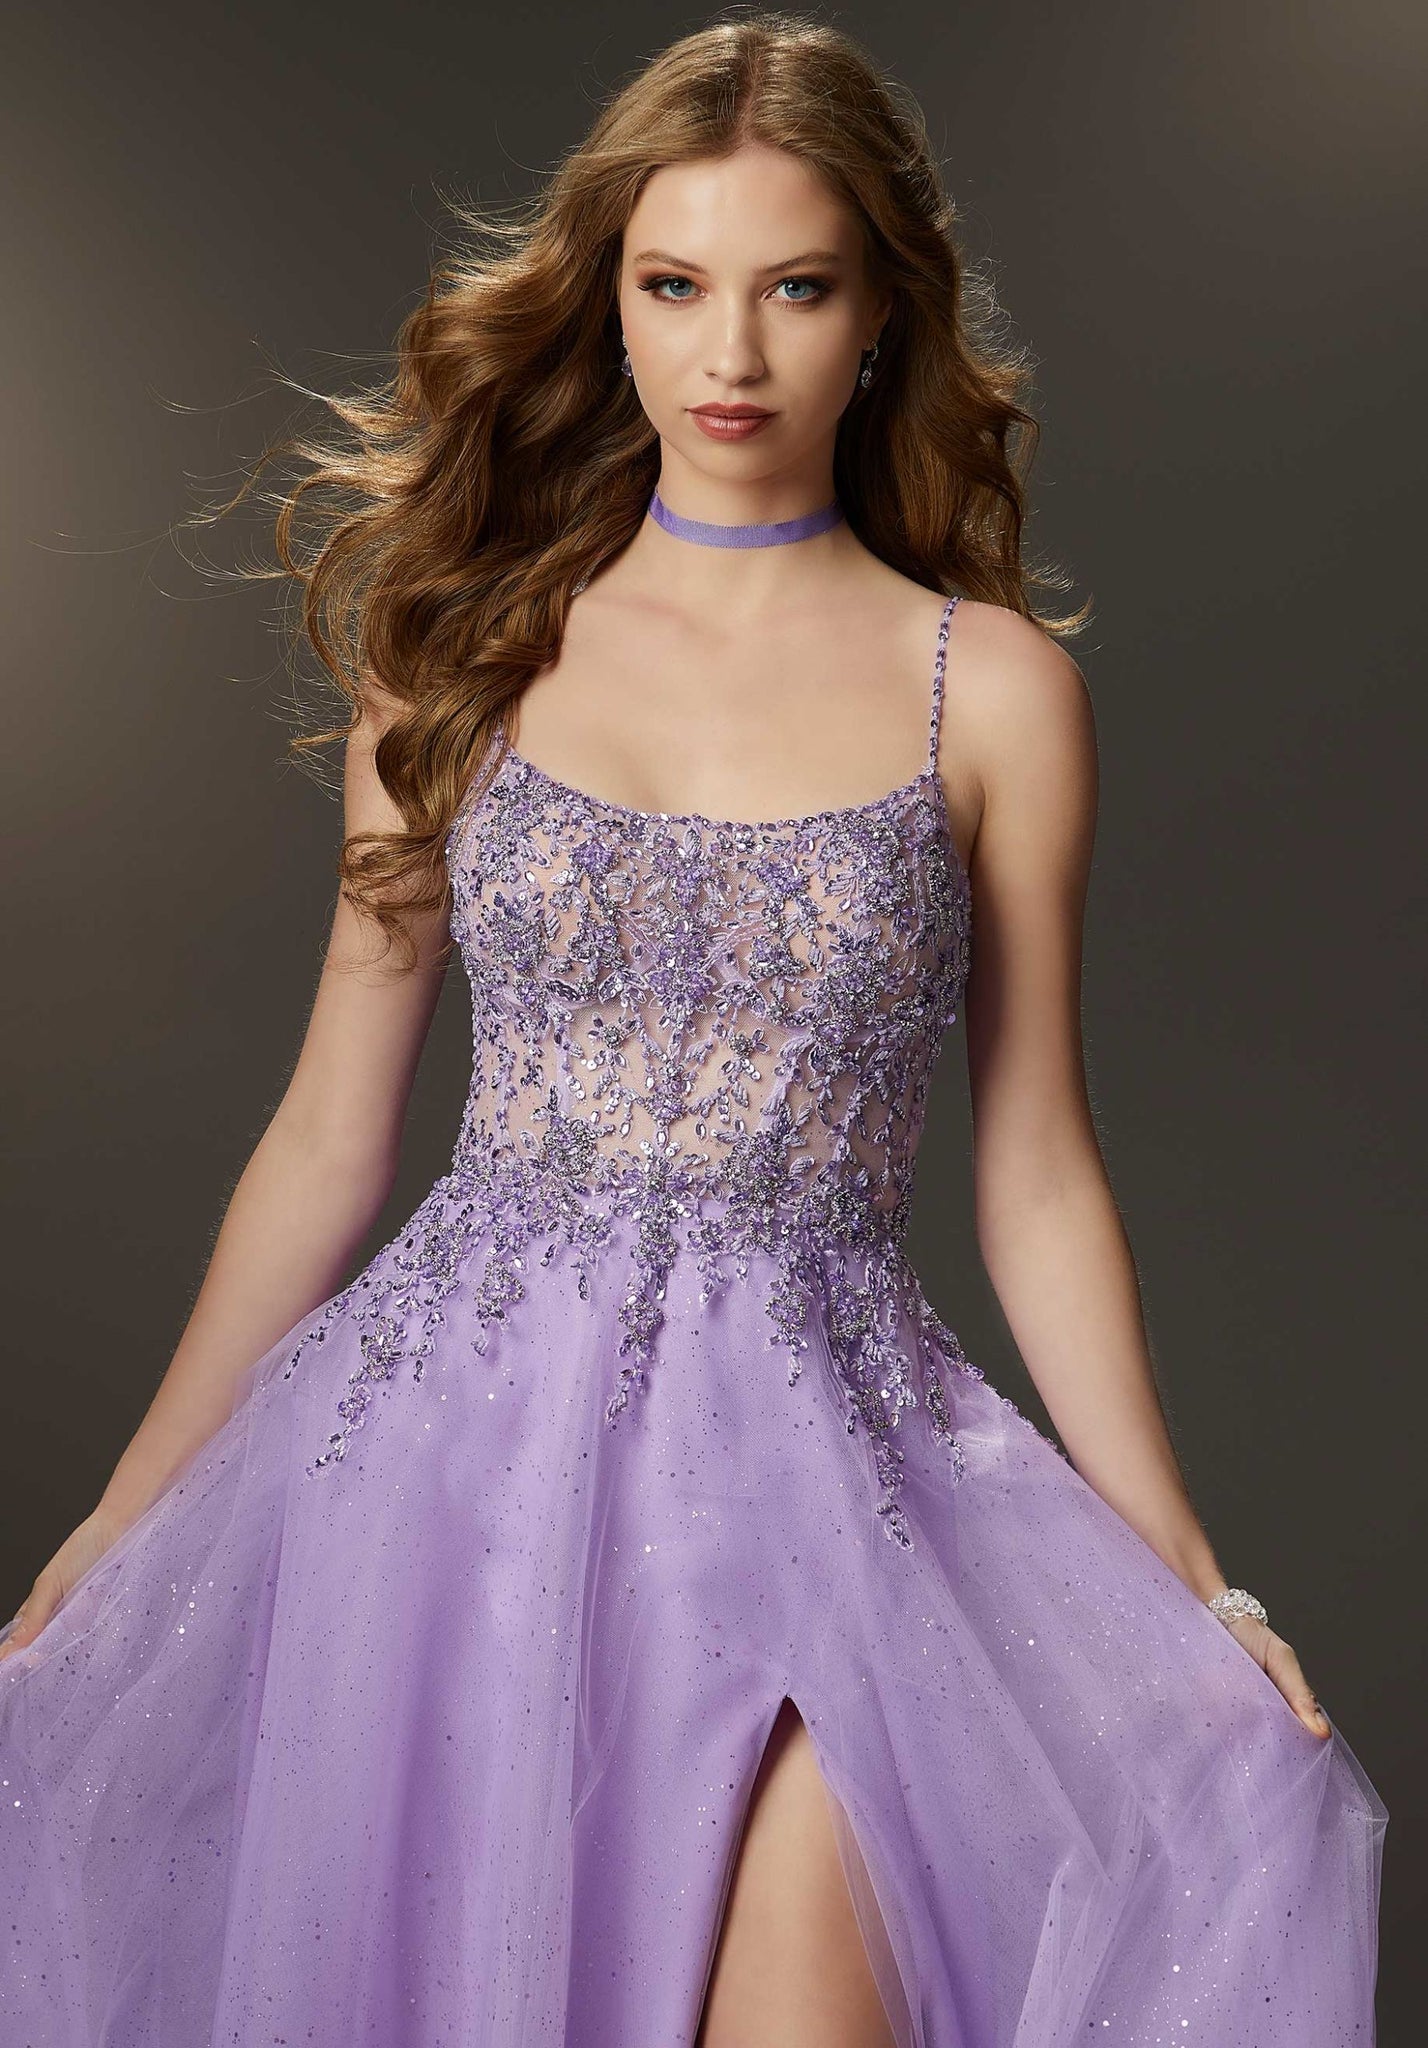 Gorgeous prom dress features a sheer embroidered bodice encrusted in rhinestone and crystal beading that meets a delicate glitter tulle skirt that floats off the body. A soft scoop neckline, delicately beaded straps, and a sultry skirt slit finish off the gown.